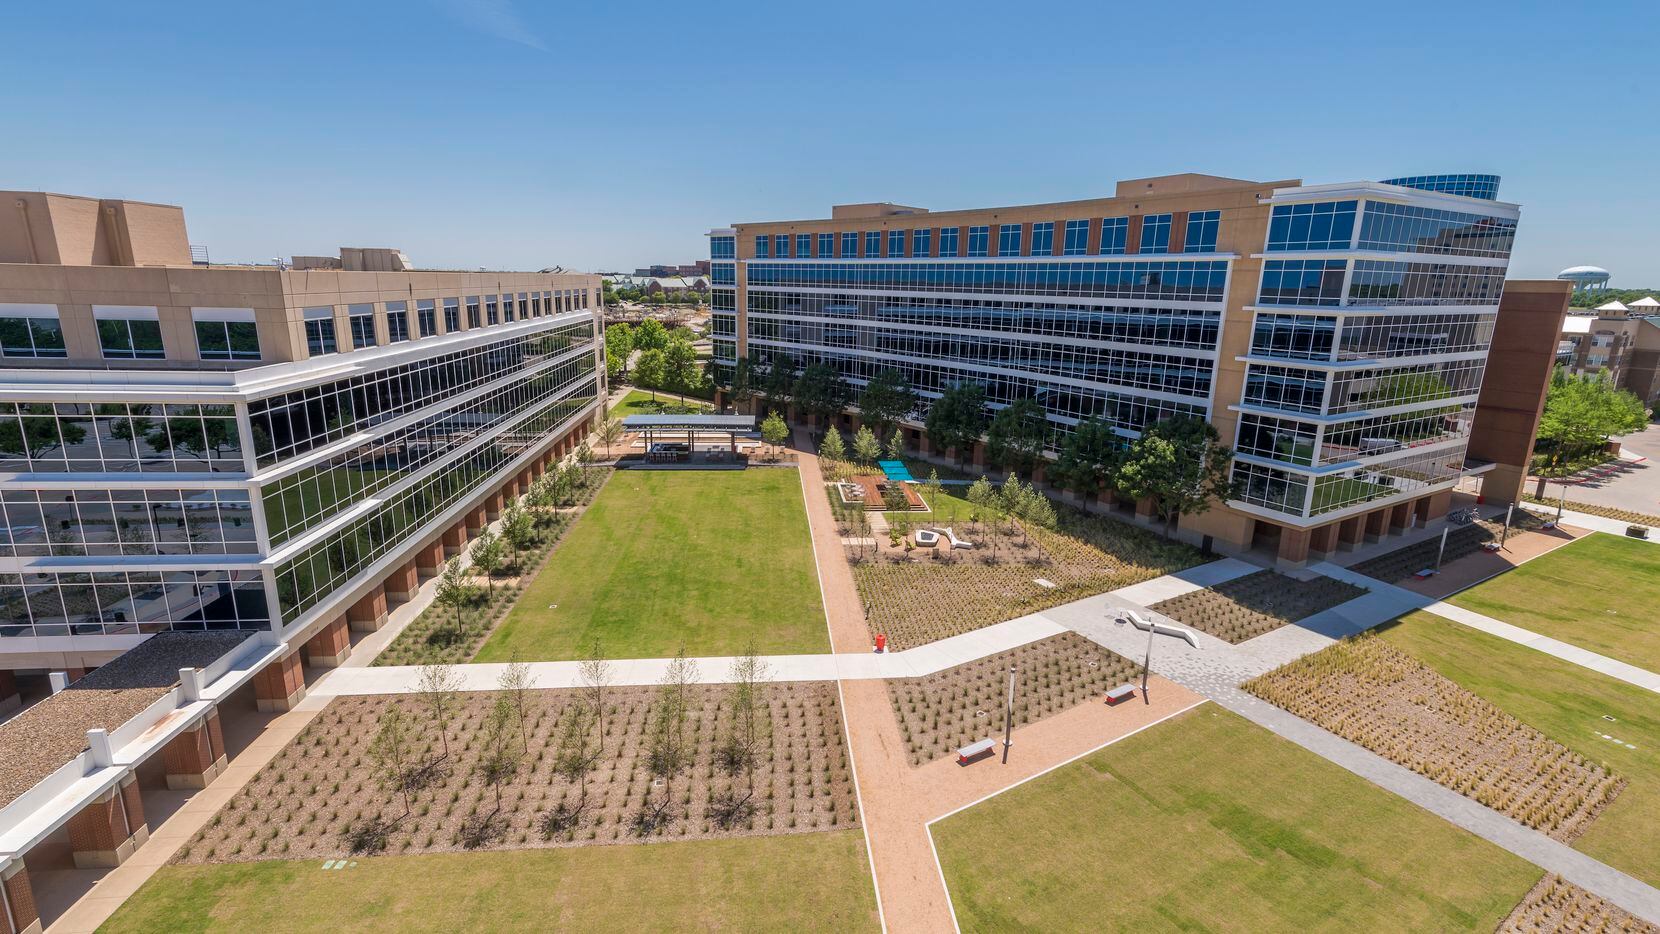 Big Telecom Corridor office lease provides new HQ for Service King